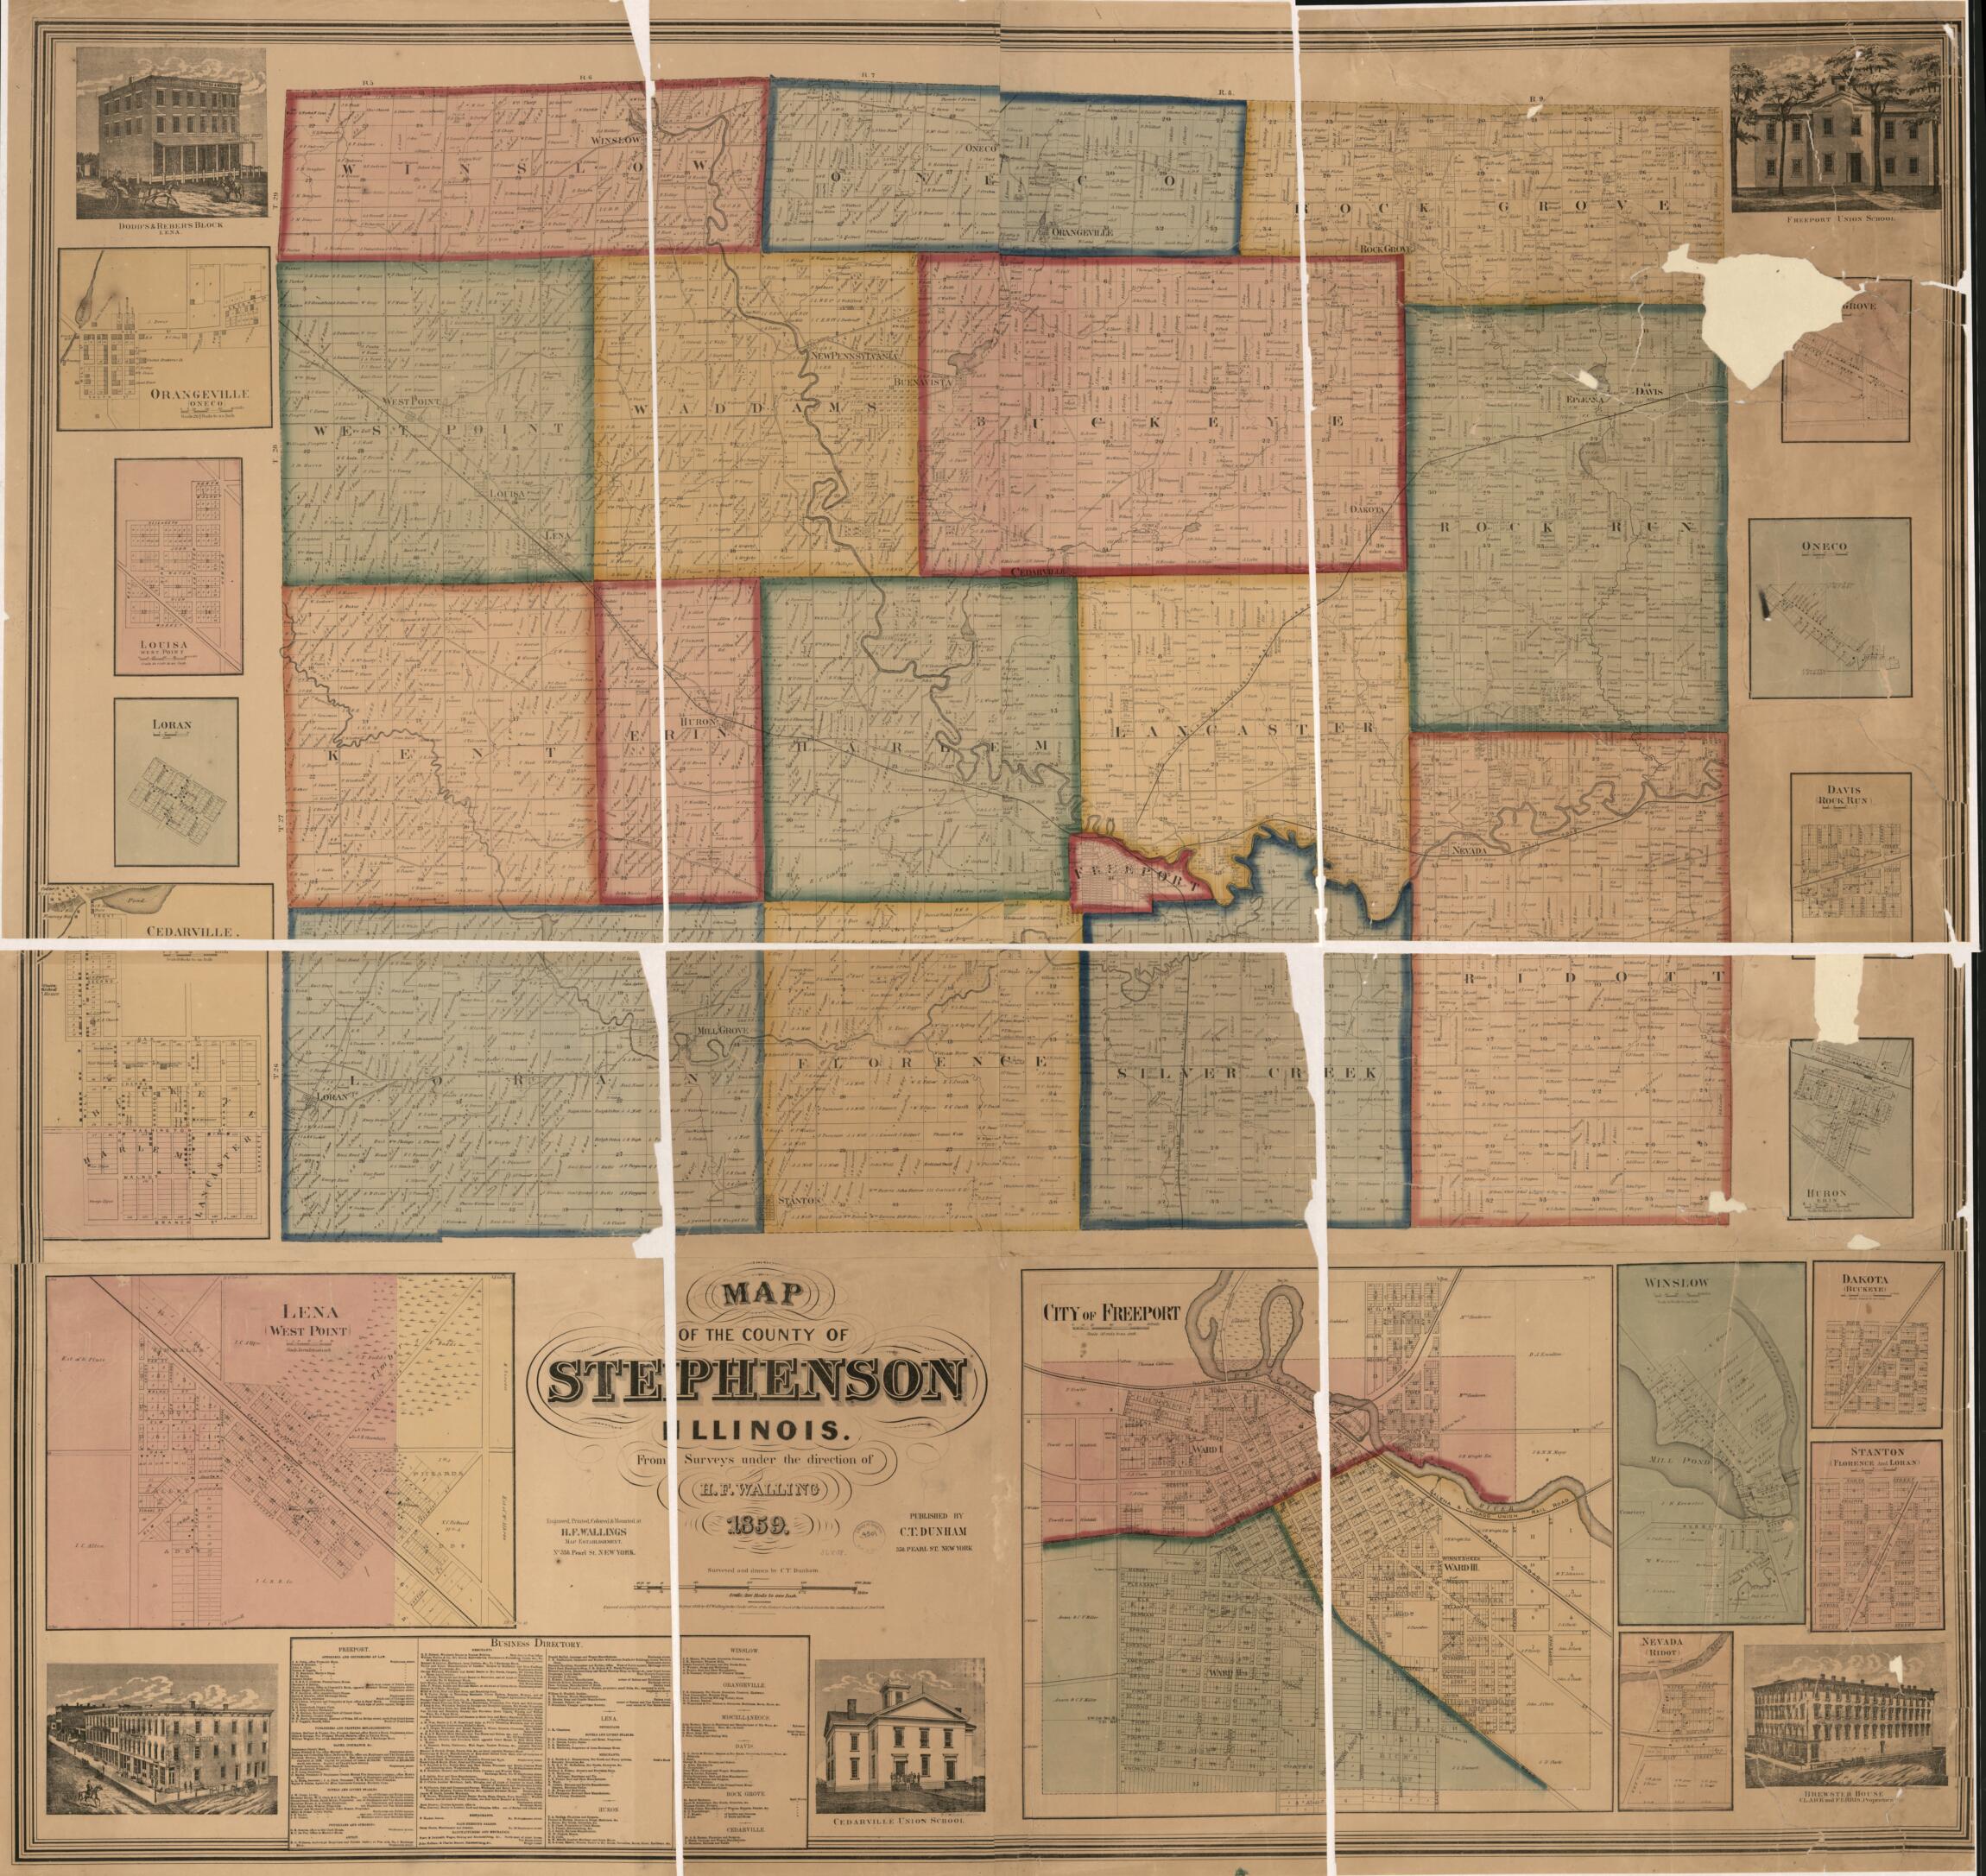 This old map of Map of the County of Stephenson Illinois from 1859 was created by Henry Francis Walling in 1859